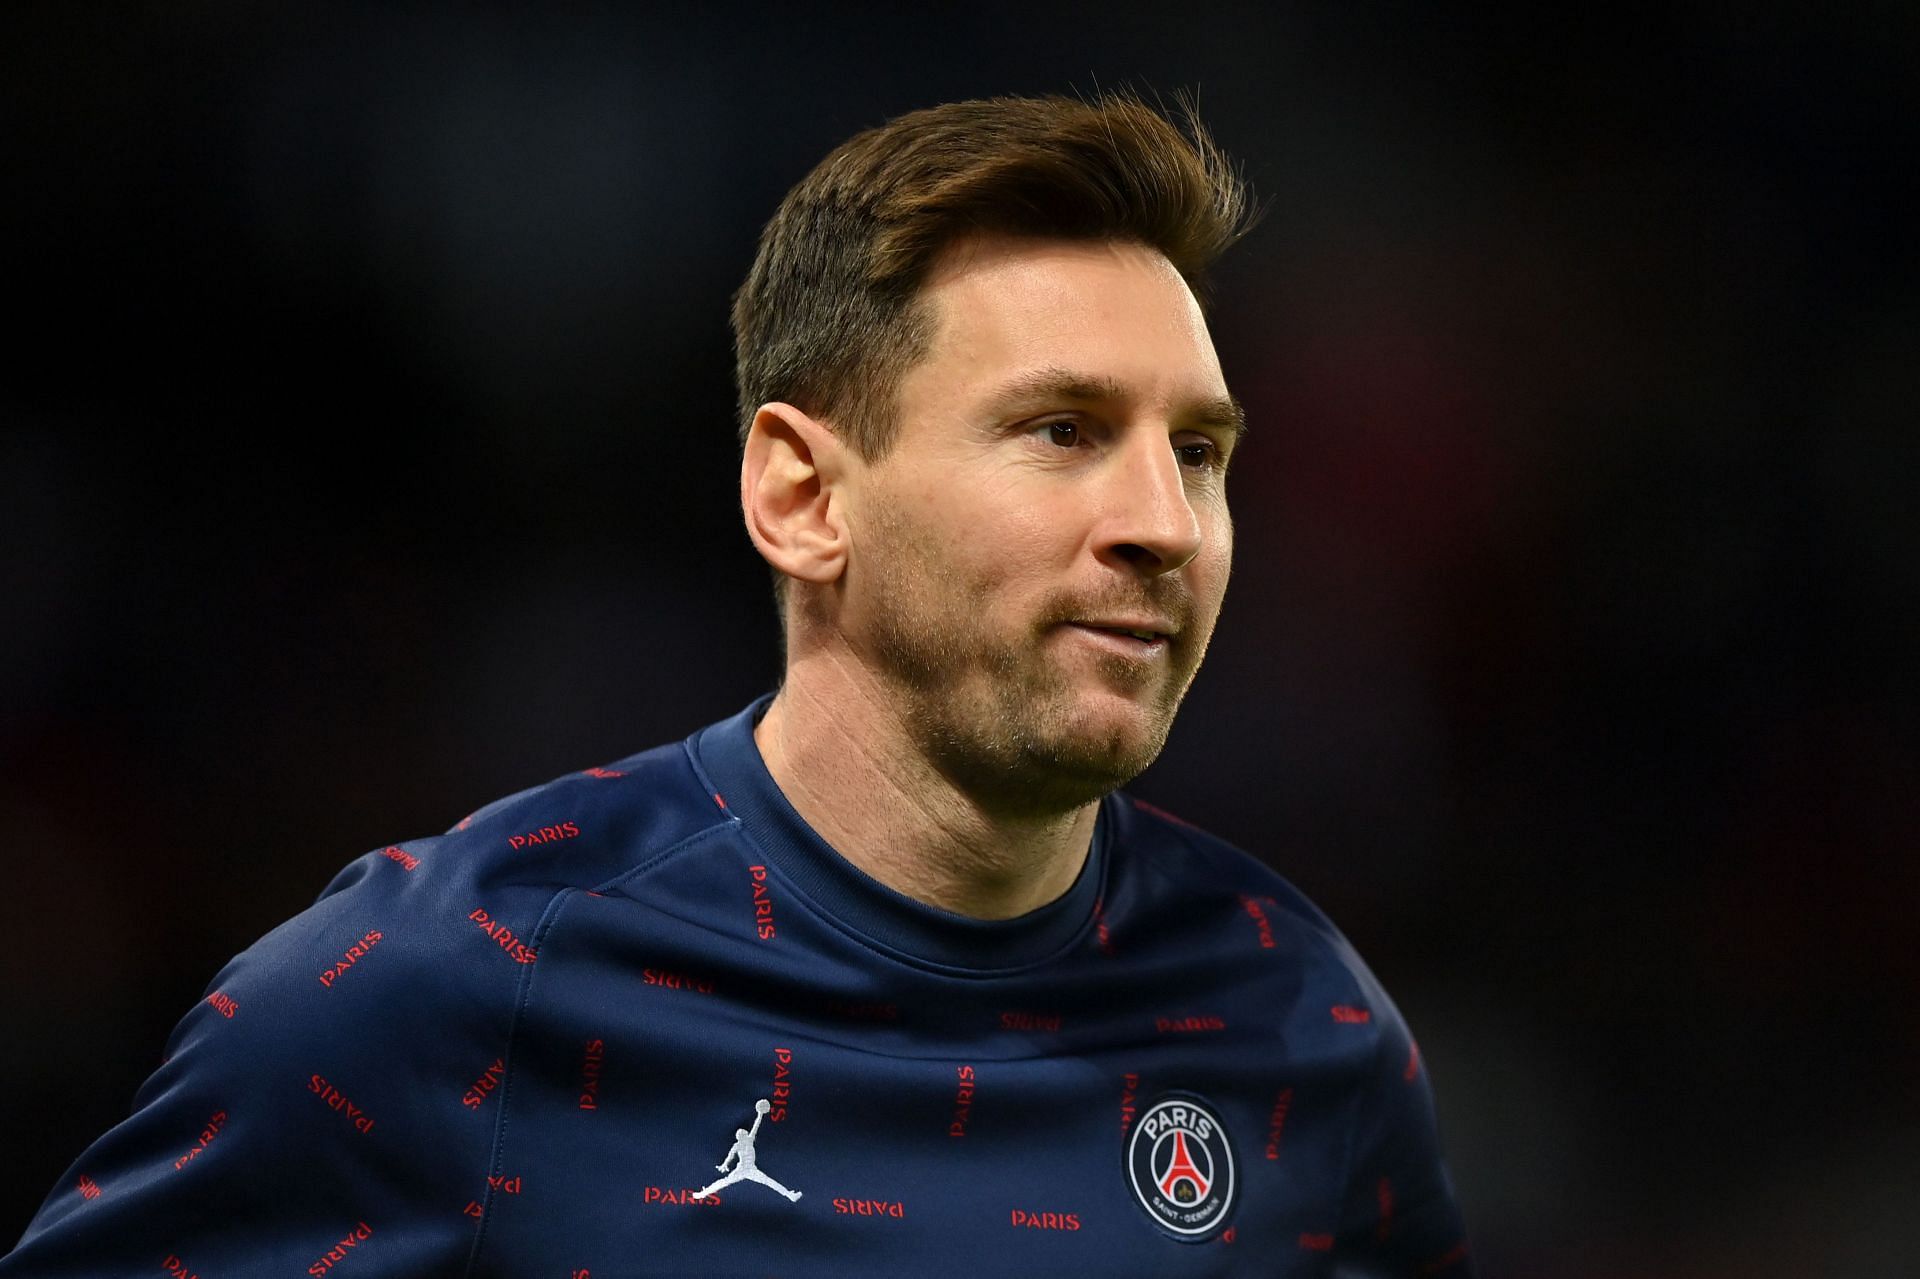 Lionel Messi says Ligue 1 is more physical compared to La Liga.